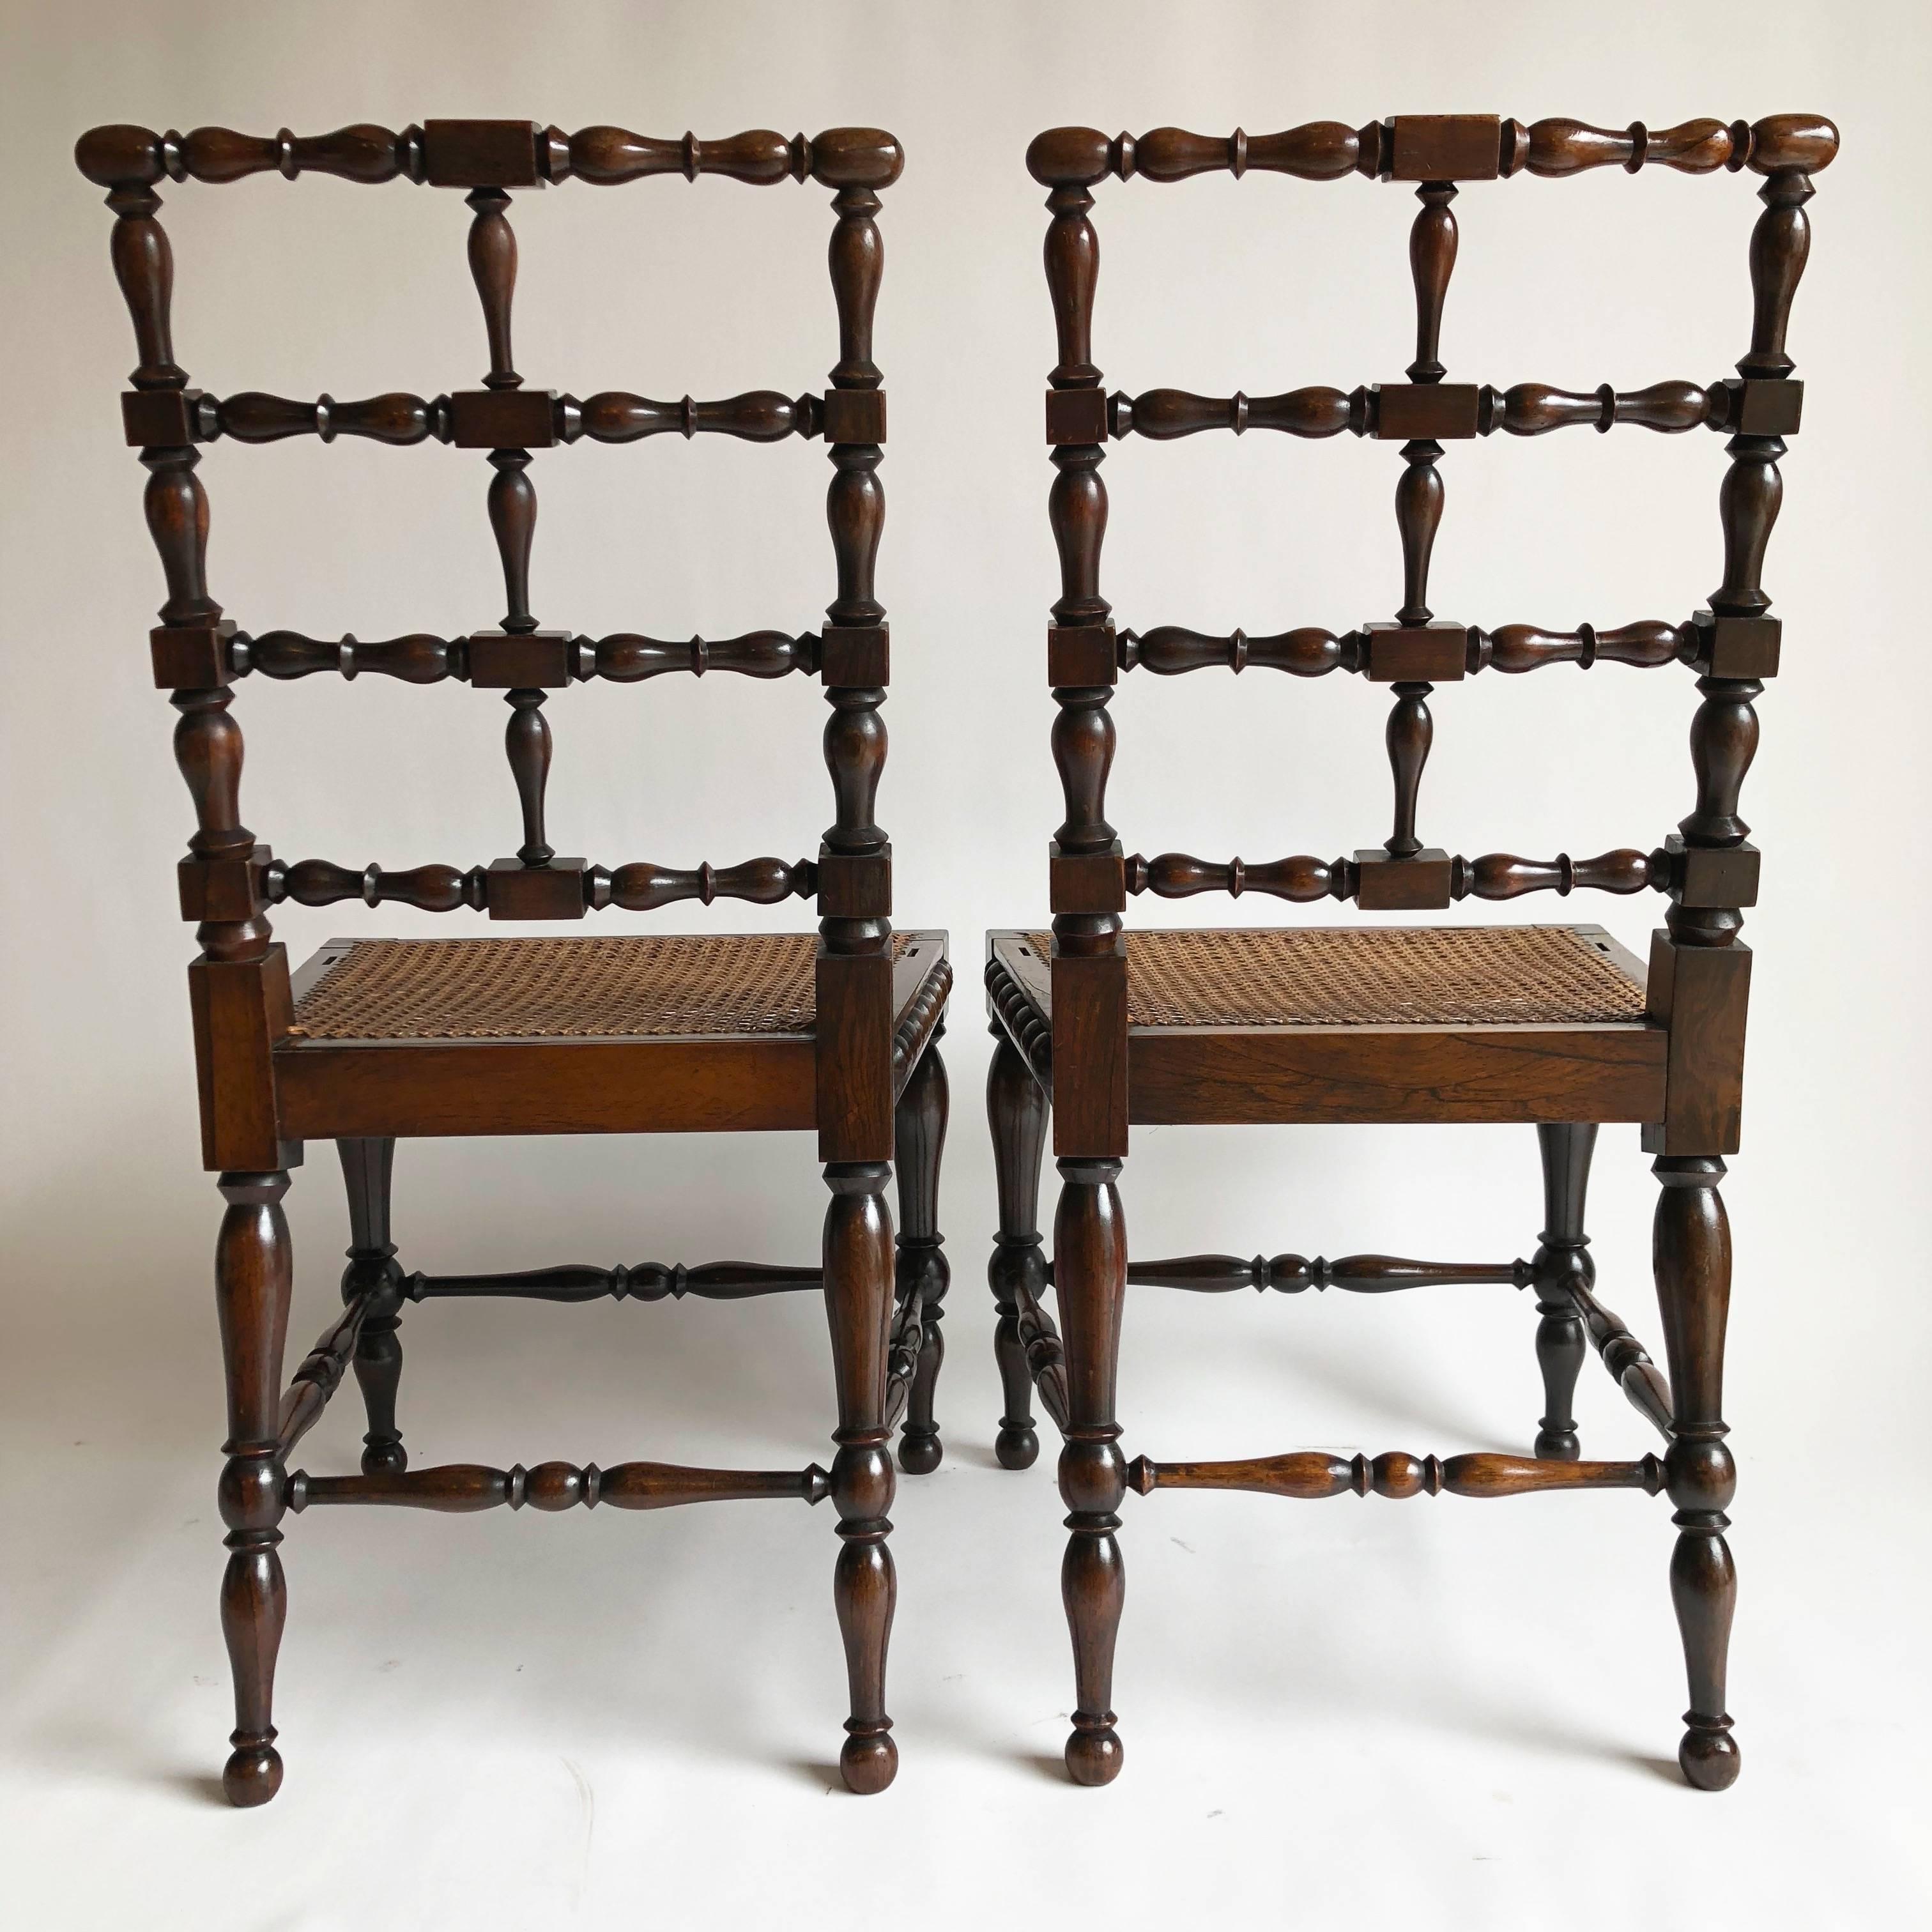 Pair of Late 19th Century Austrian Rosewood Spindle Chairs with Cane Seats 10